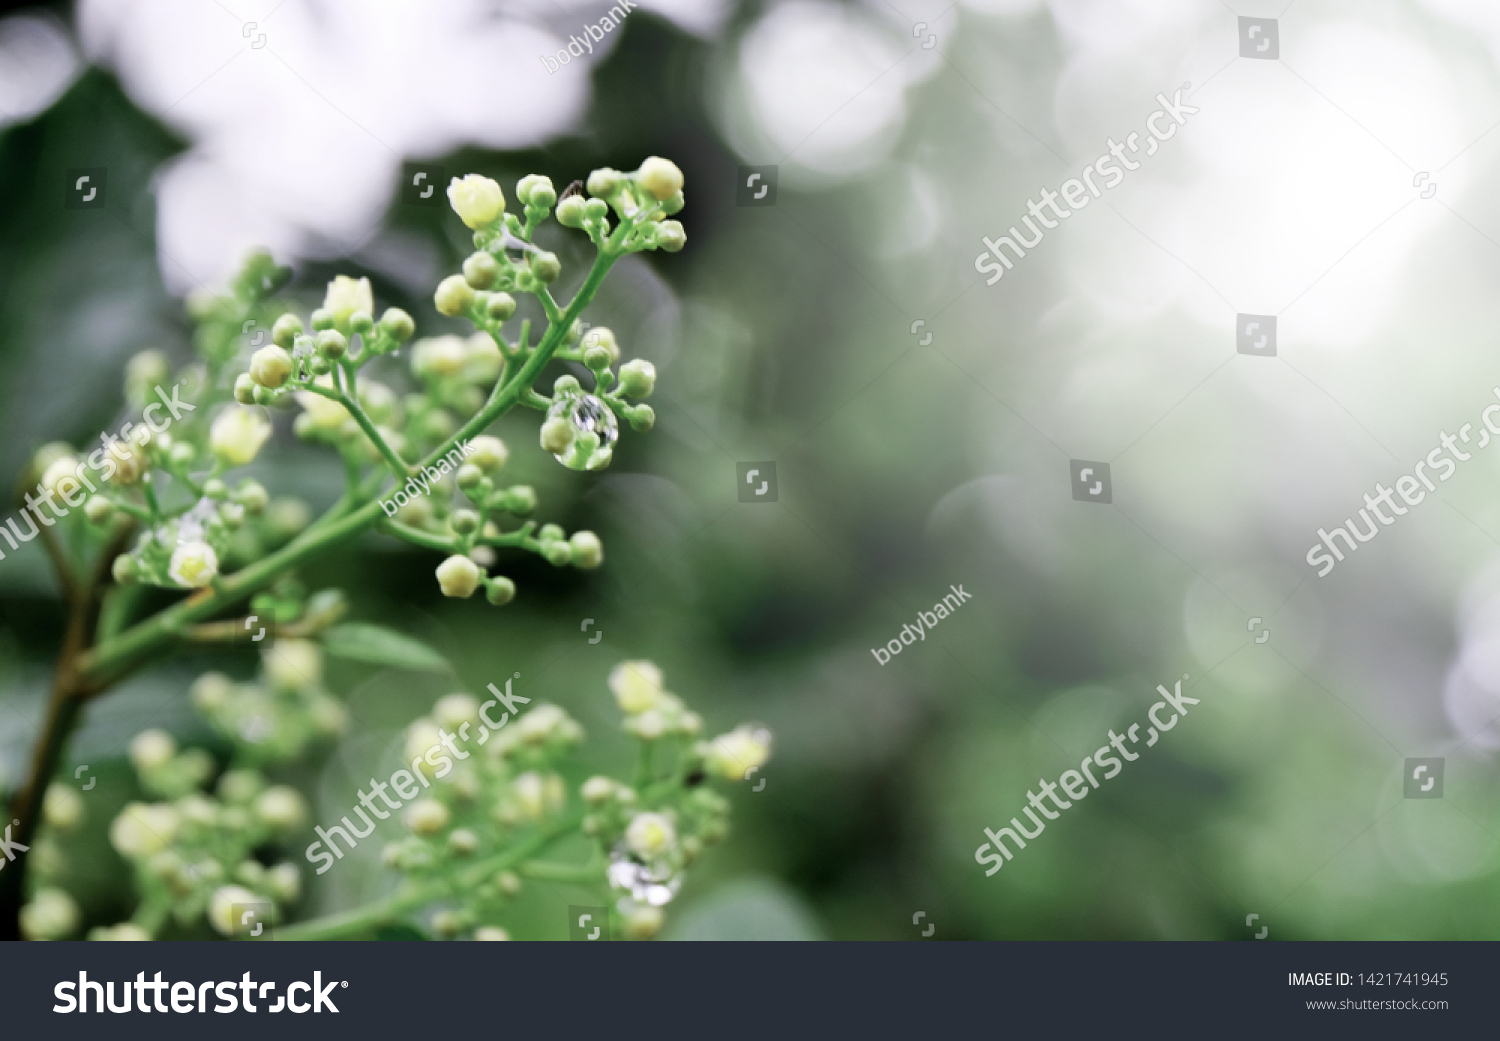 Closeup nature view of green leaf on blurred greenery background in garden with copy space using as background natural green plants landscape, ecology. Blurred green bokeh nature abstract background #1421741945